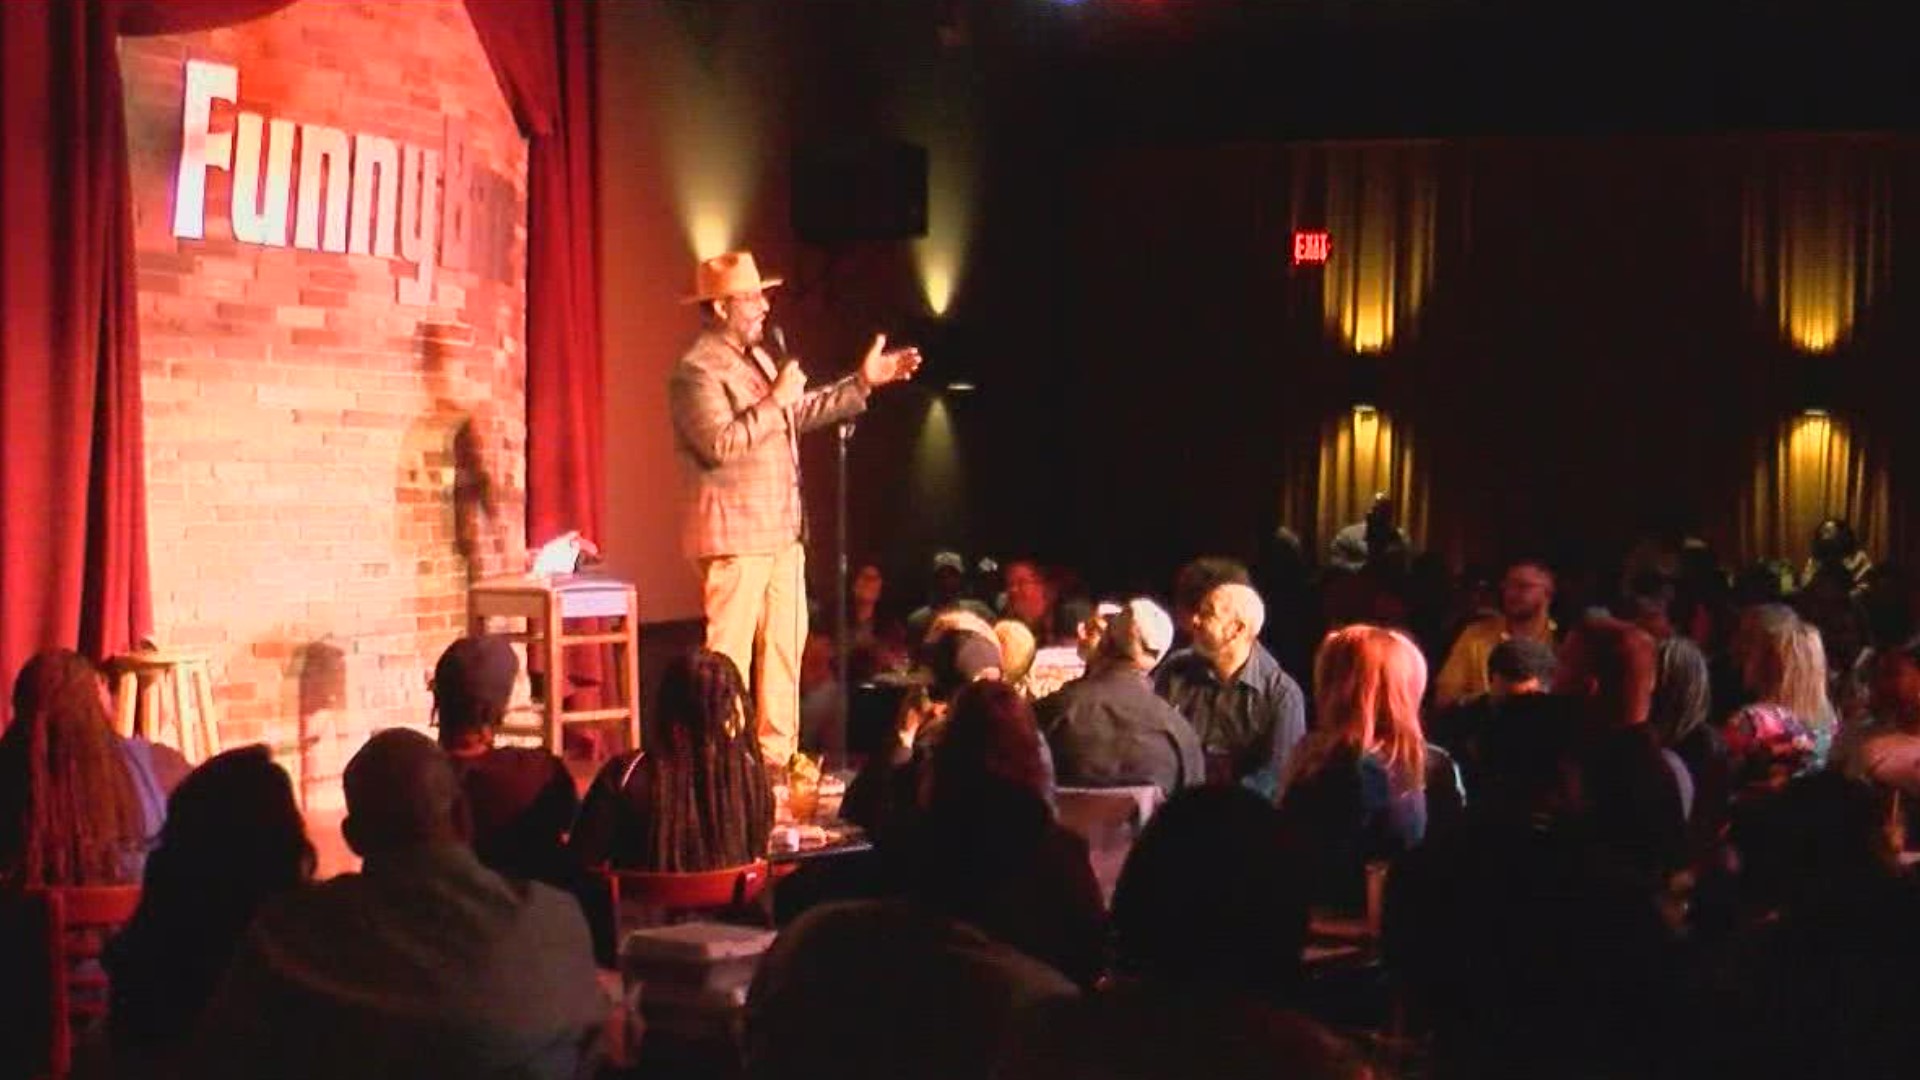 There’s an open mic night coming Thursday to Funny Bone at Levis Commons, giving aspiring comics a chance to work the stage at northwest Ohio's biggest comedy club.